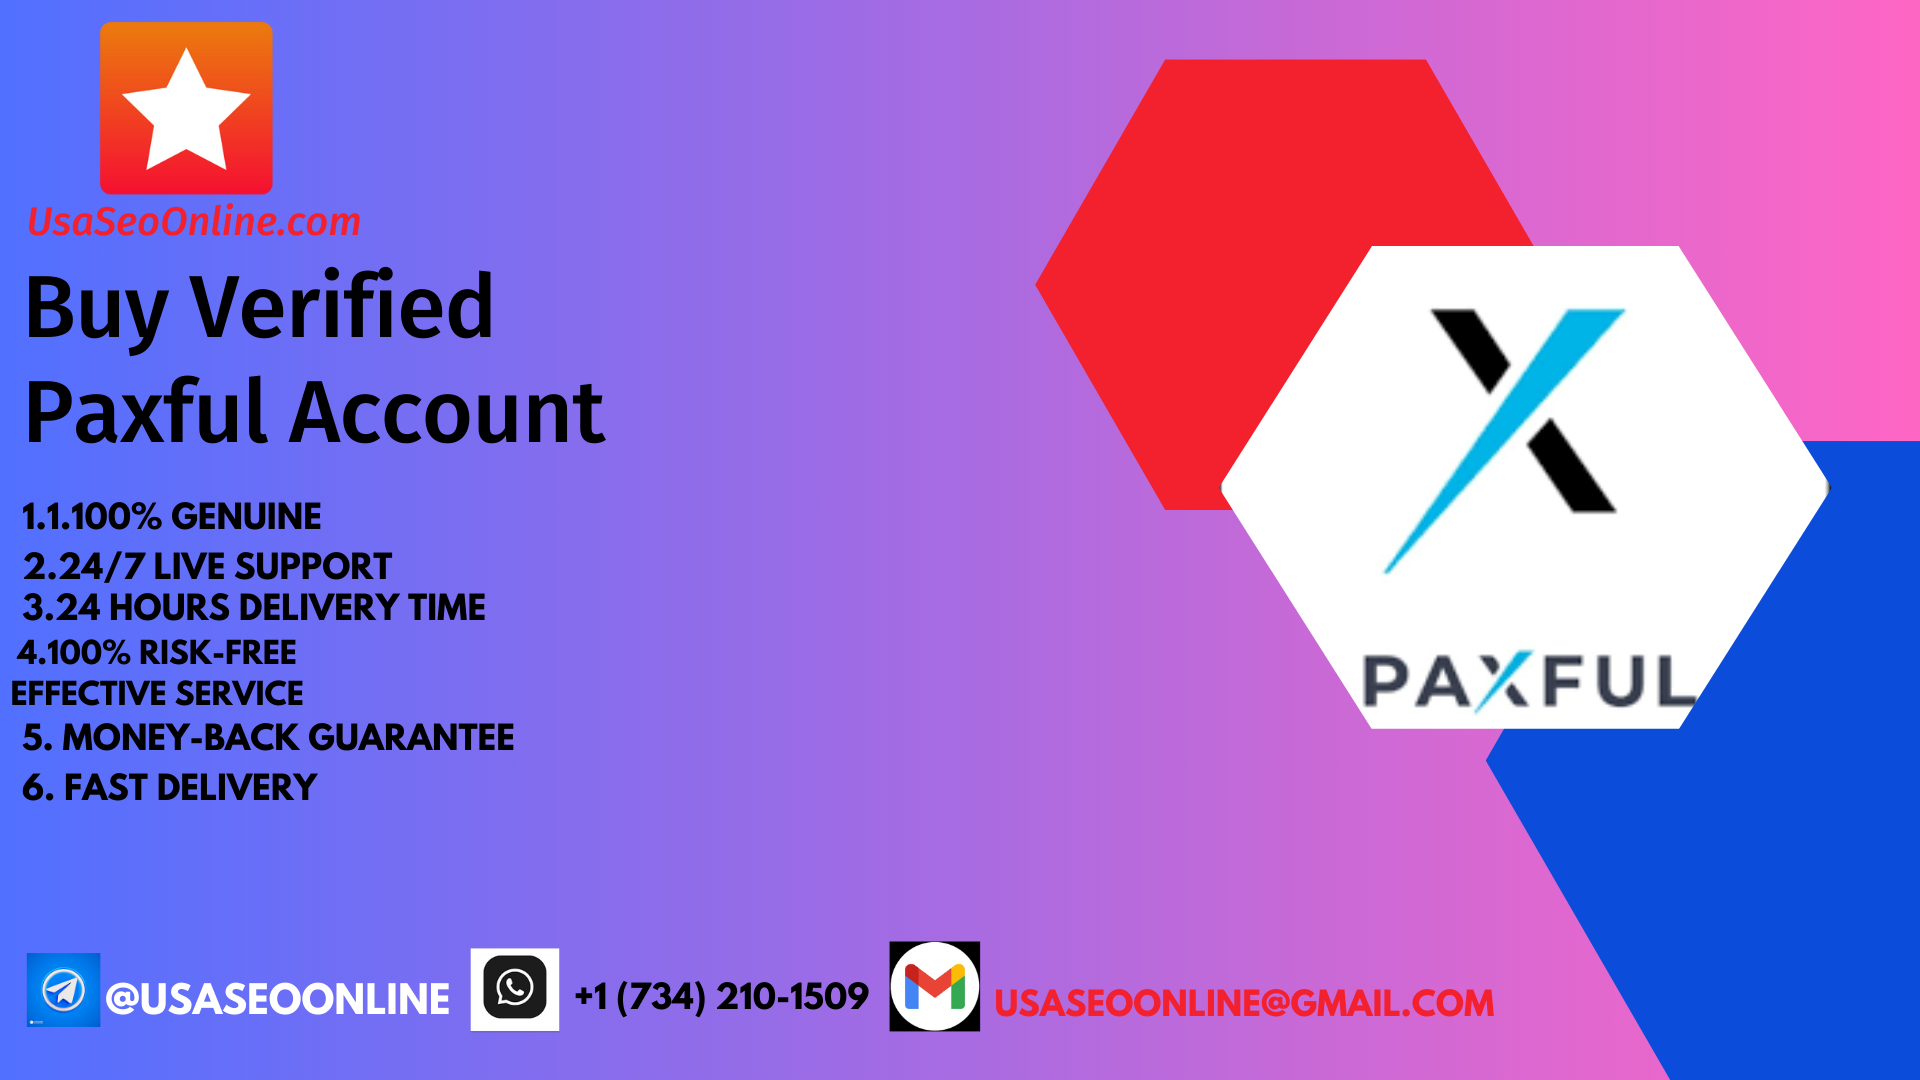 Buy Verified Paxful Account - USA SEO Online